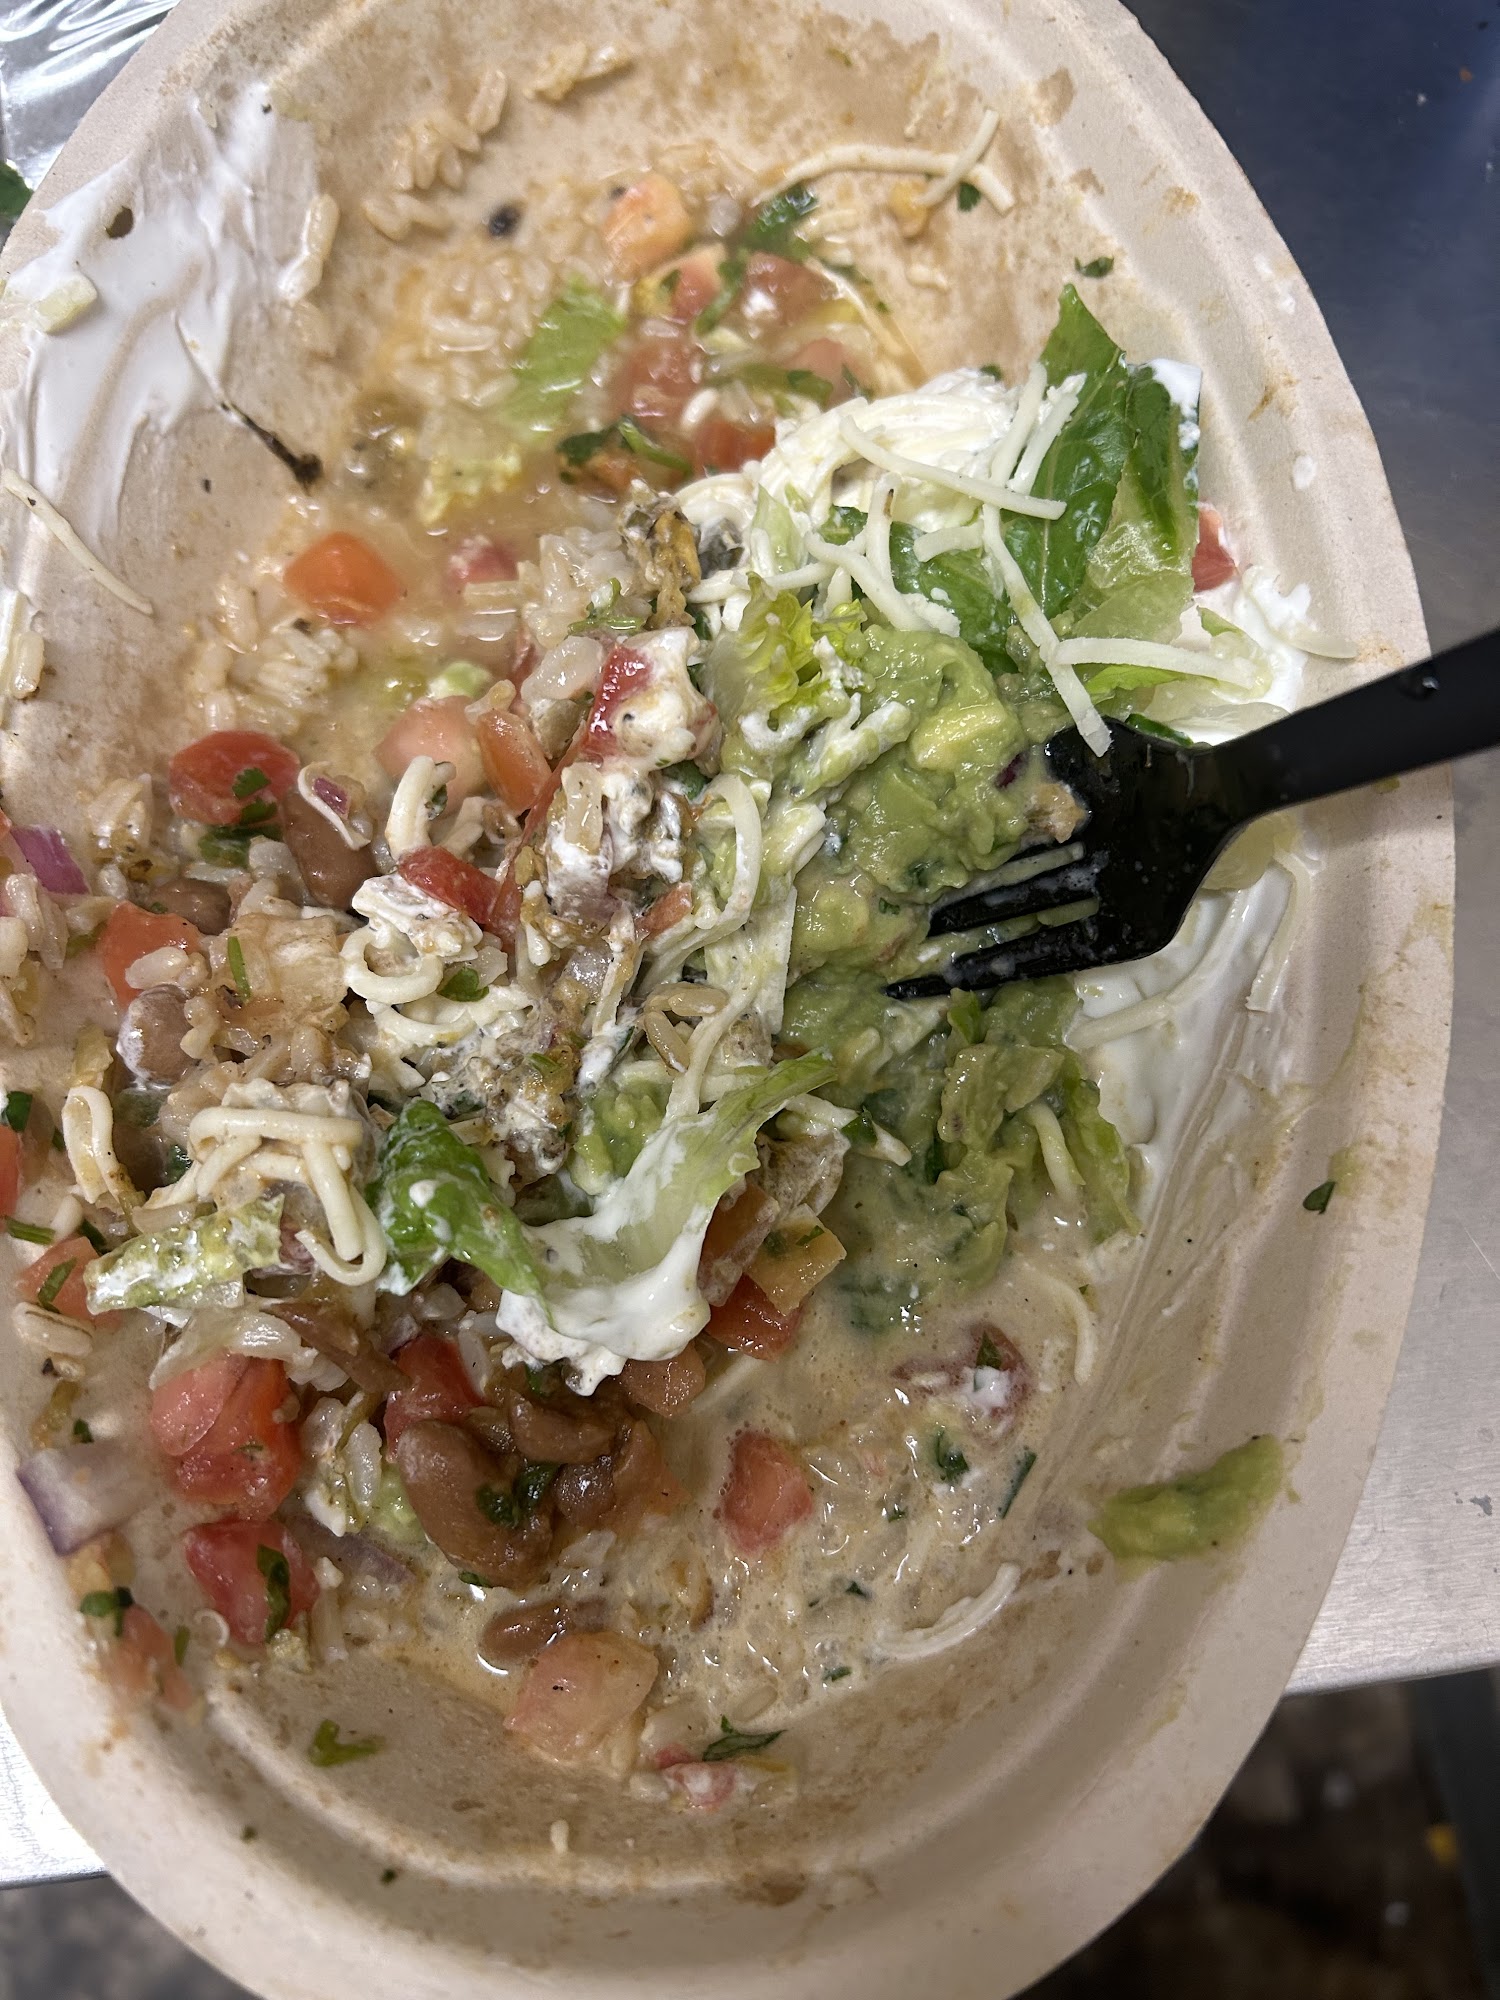 Chipotle - Lenox Mall Food Court